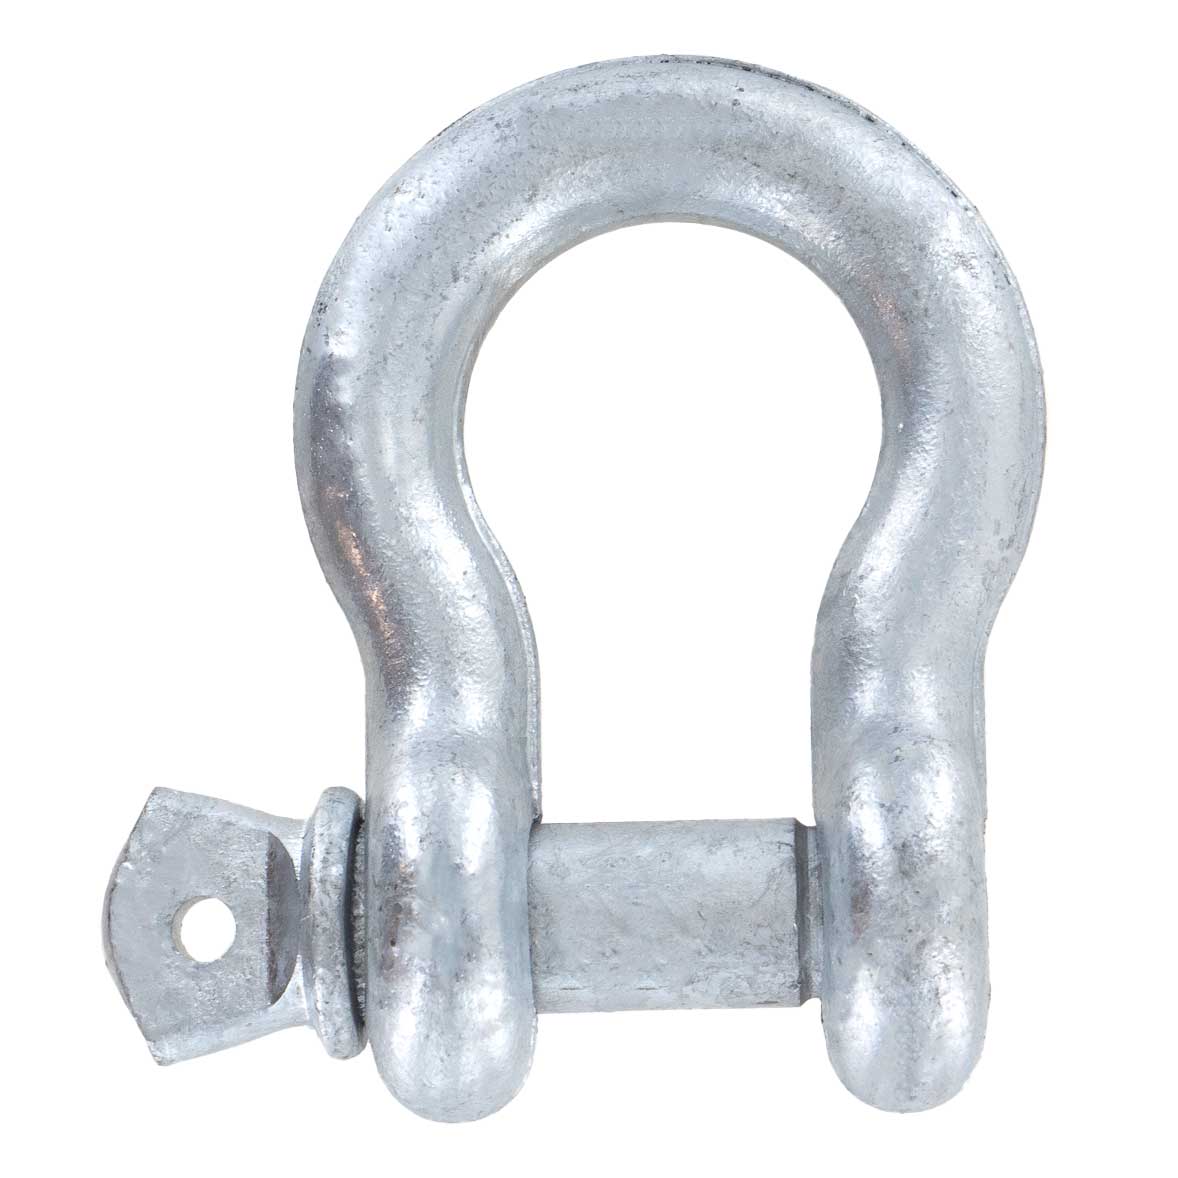 5/8" Galvanized Screw Pin Anchor Shackle - 3.25 Ton rear view